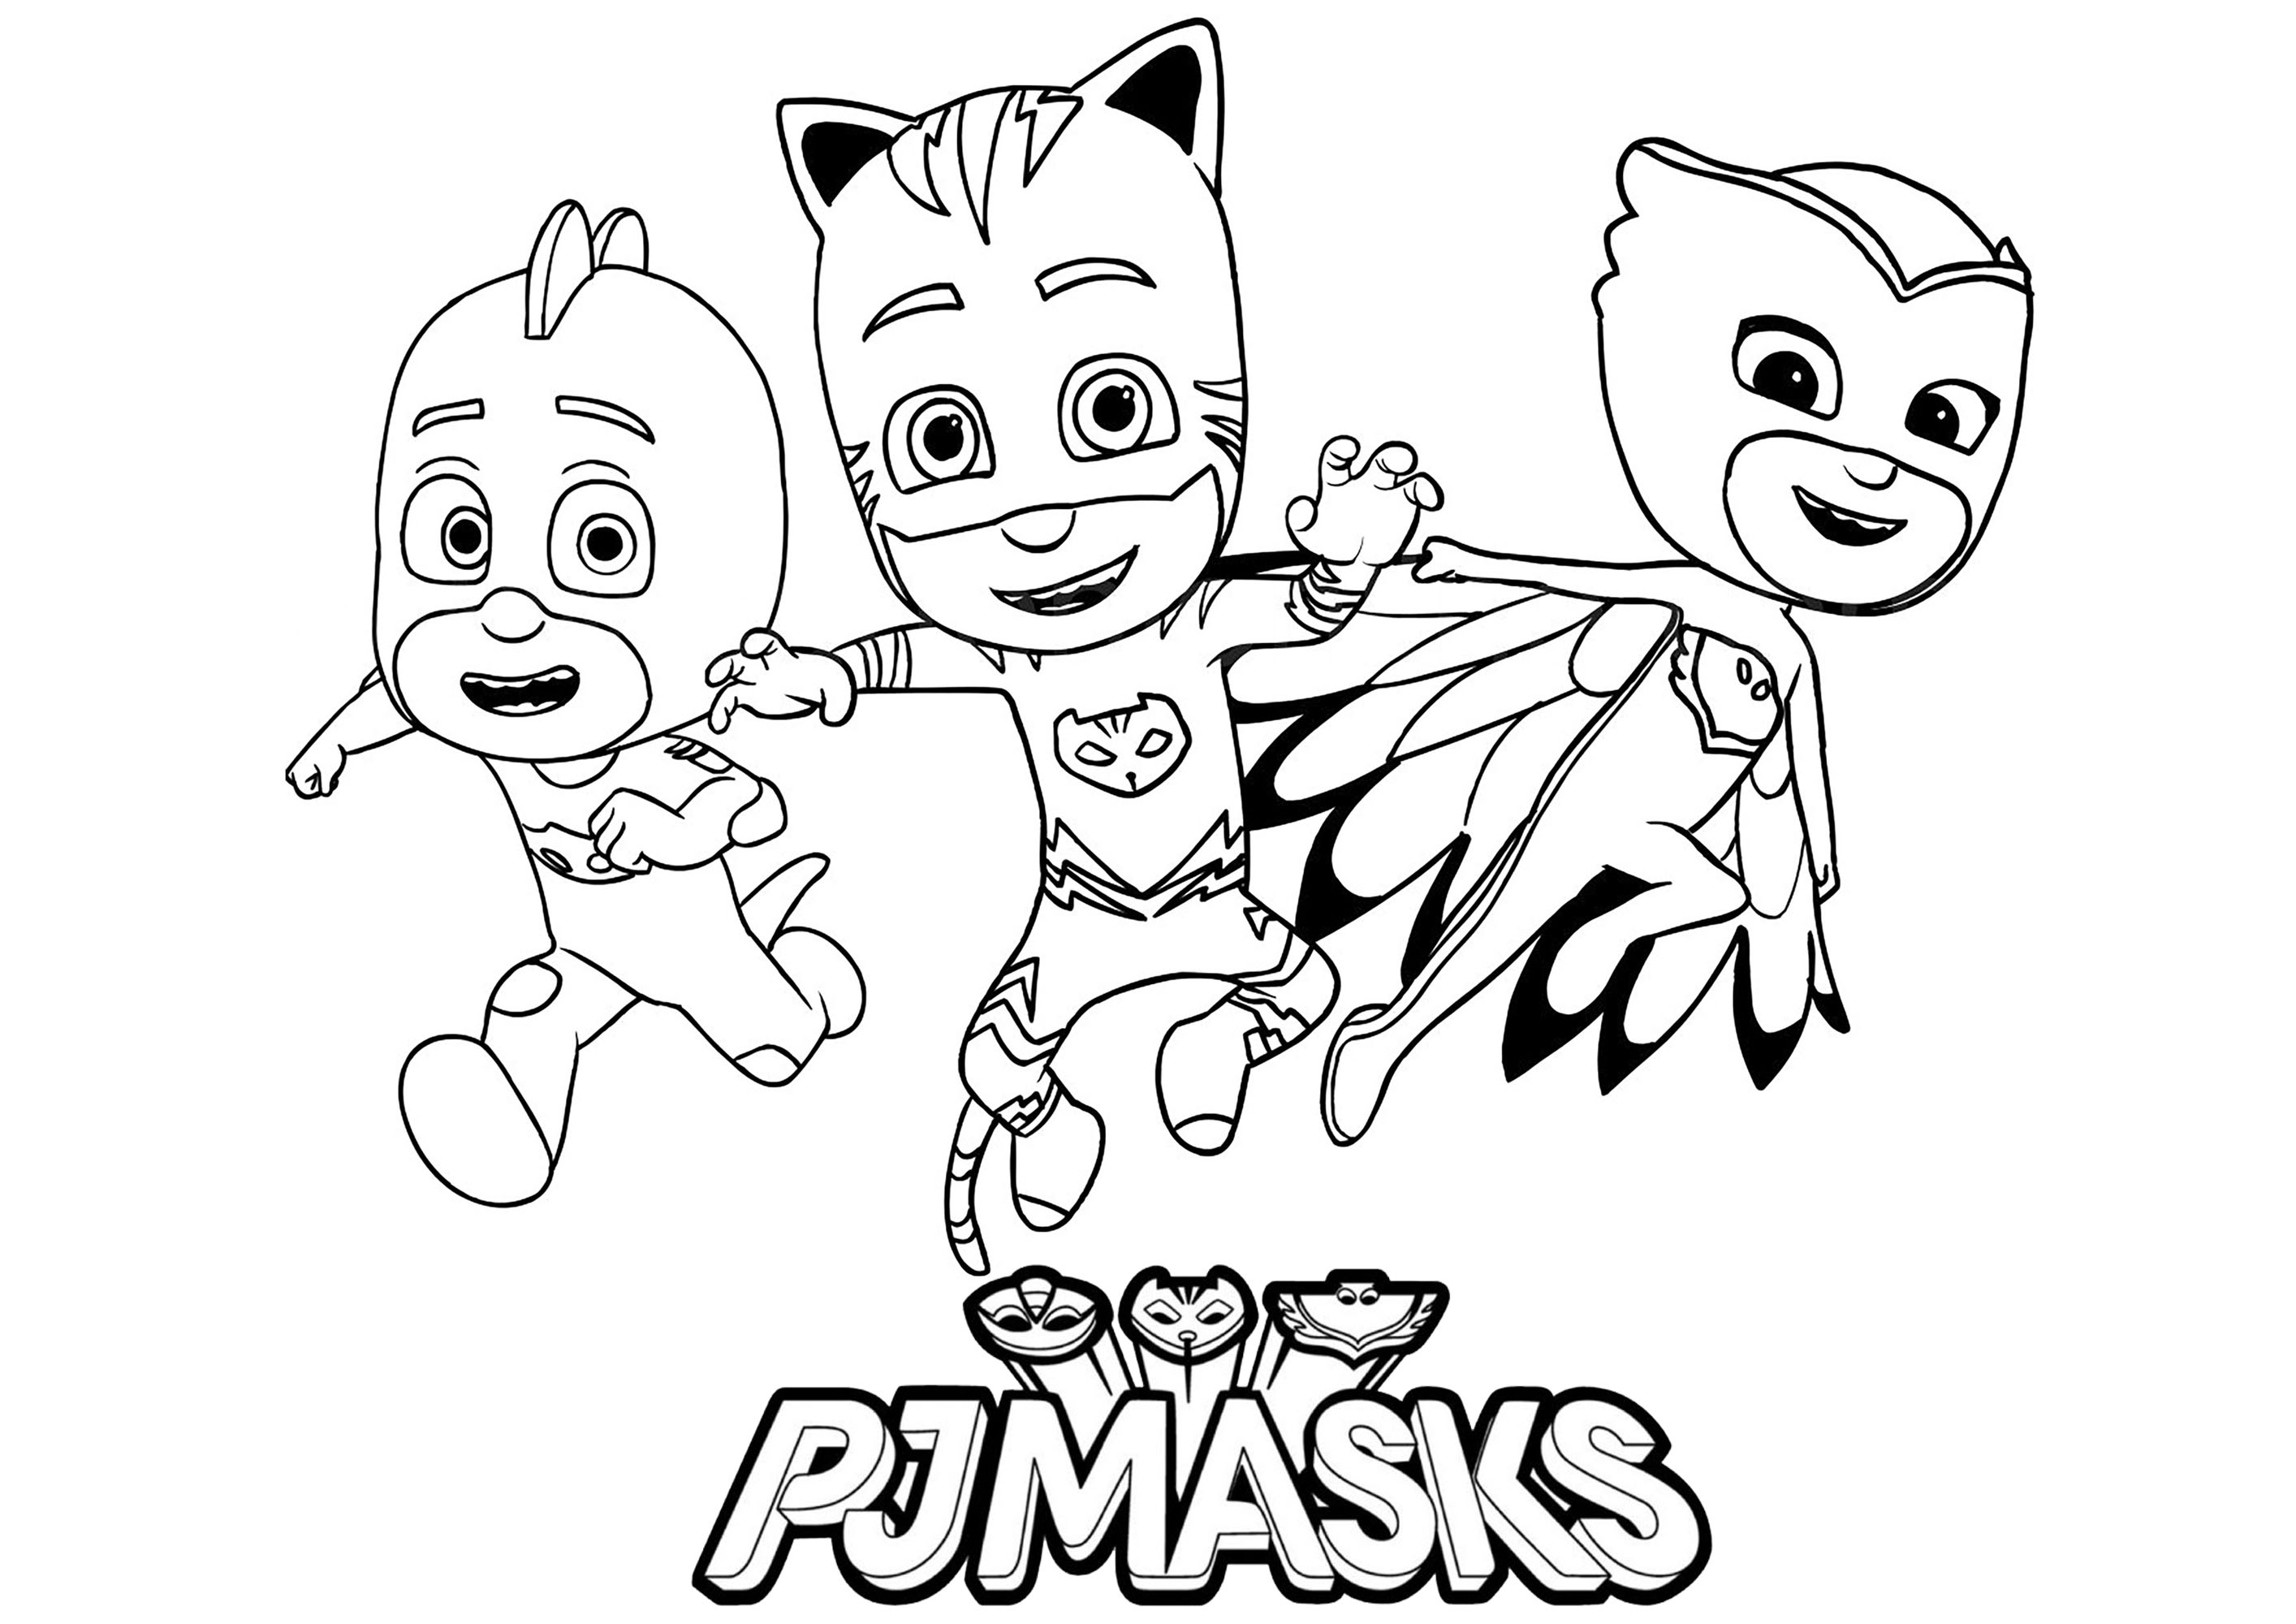 printable pj mask coloring pages That are Geeky | Ruby Website